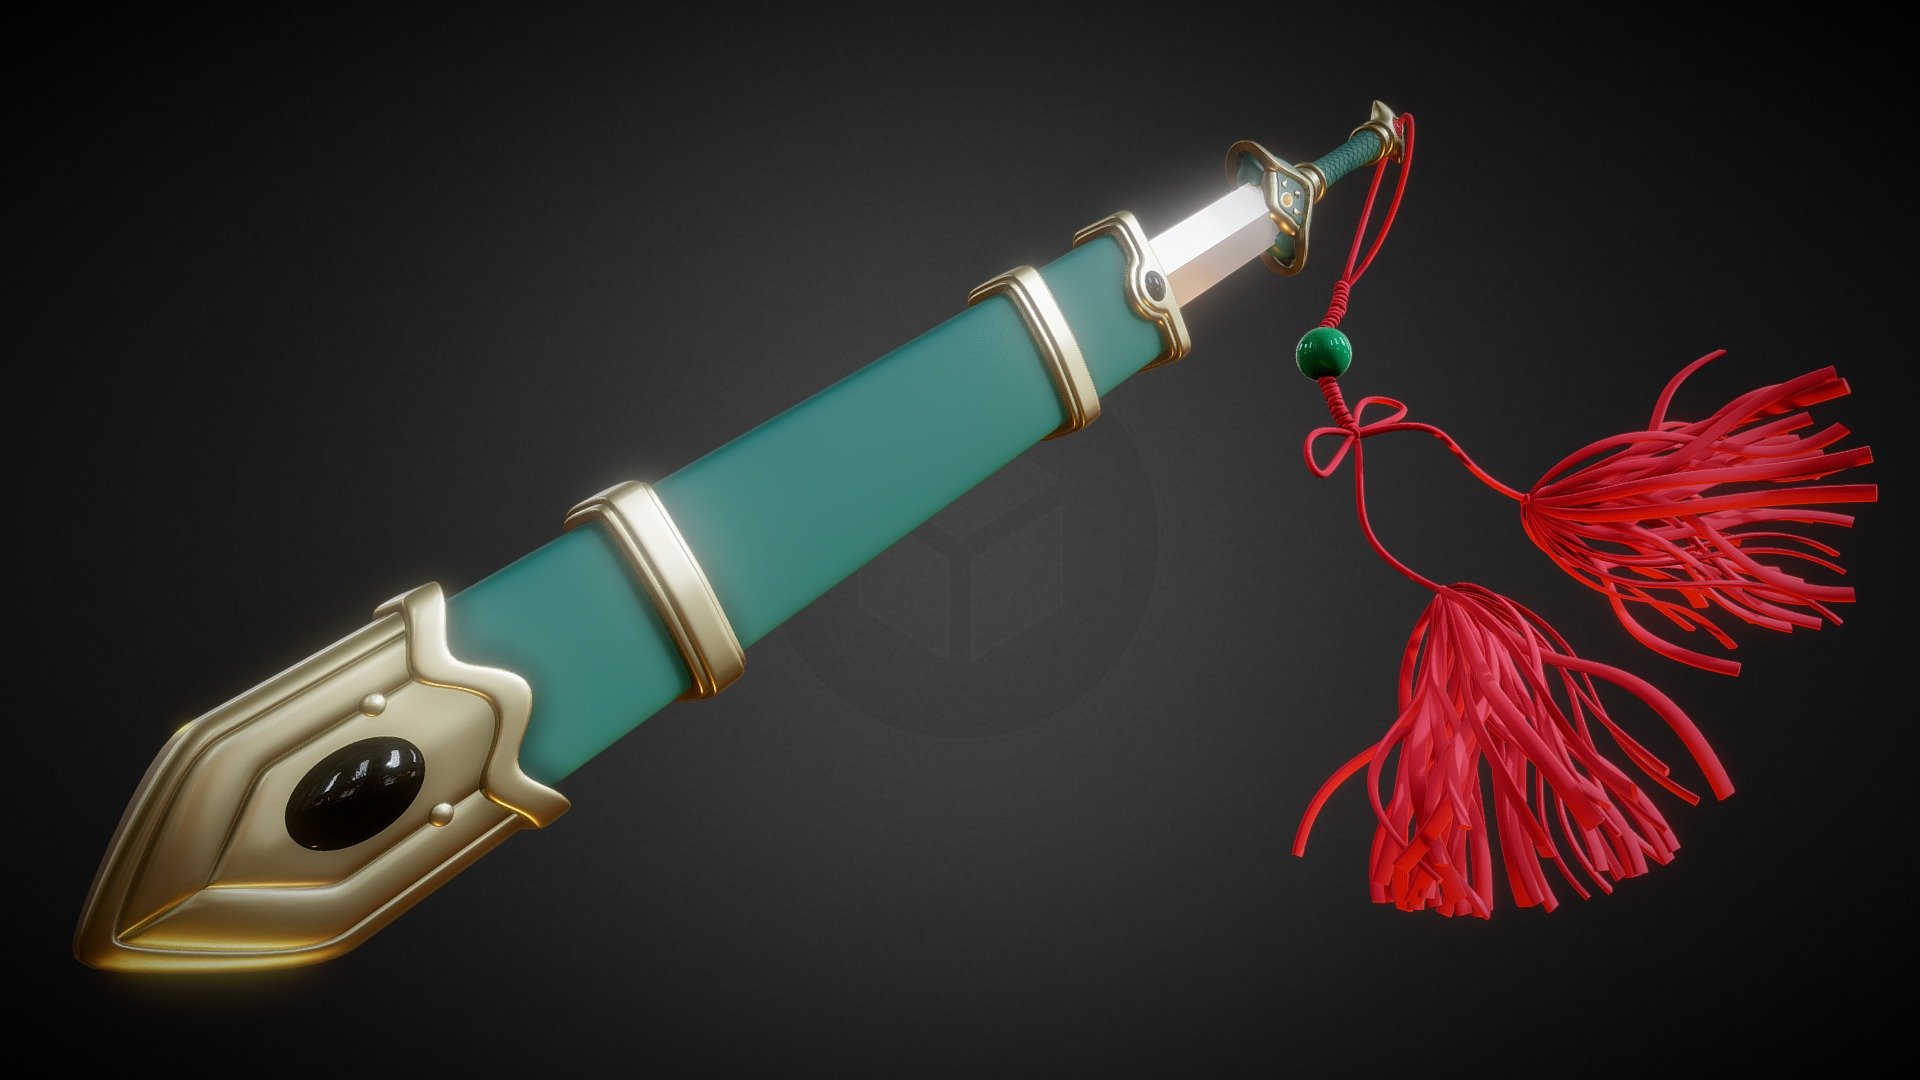 Printable model of the characteristic sword and sheath used by Shaoran Li from CardCaptor Sakura and Tsubasa Resevoir Chronicle anime and manga by CLAMP. 

The sword can be printed separately from the sheath to attatch and detatch it from the sheath as a real sword.

💮 If you liked my work remember to Follow me and Share! 
🧸 💬 Commissions Open: ko-fi.com/Tsubasa_Art ☕🌸 !! - Printable Shaoran Li´s Sword & Sheath - Buy Royalty Free 3D model by Tsubasa ツバサ (@Tsubasa_Art) 3d model